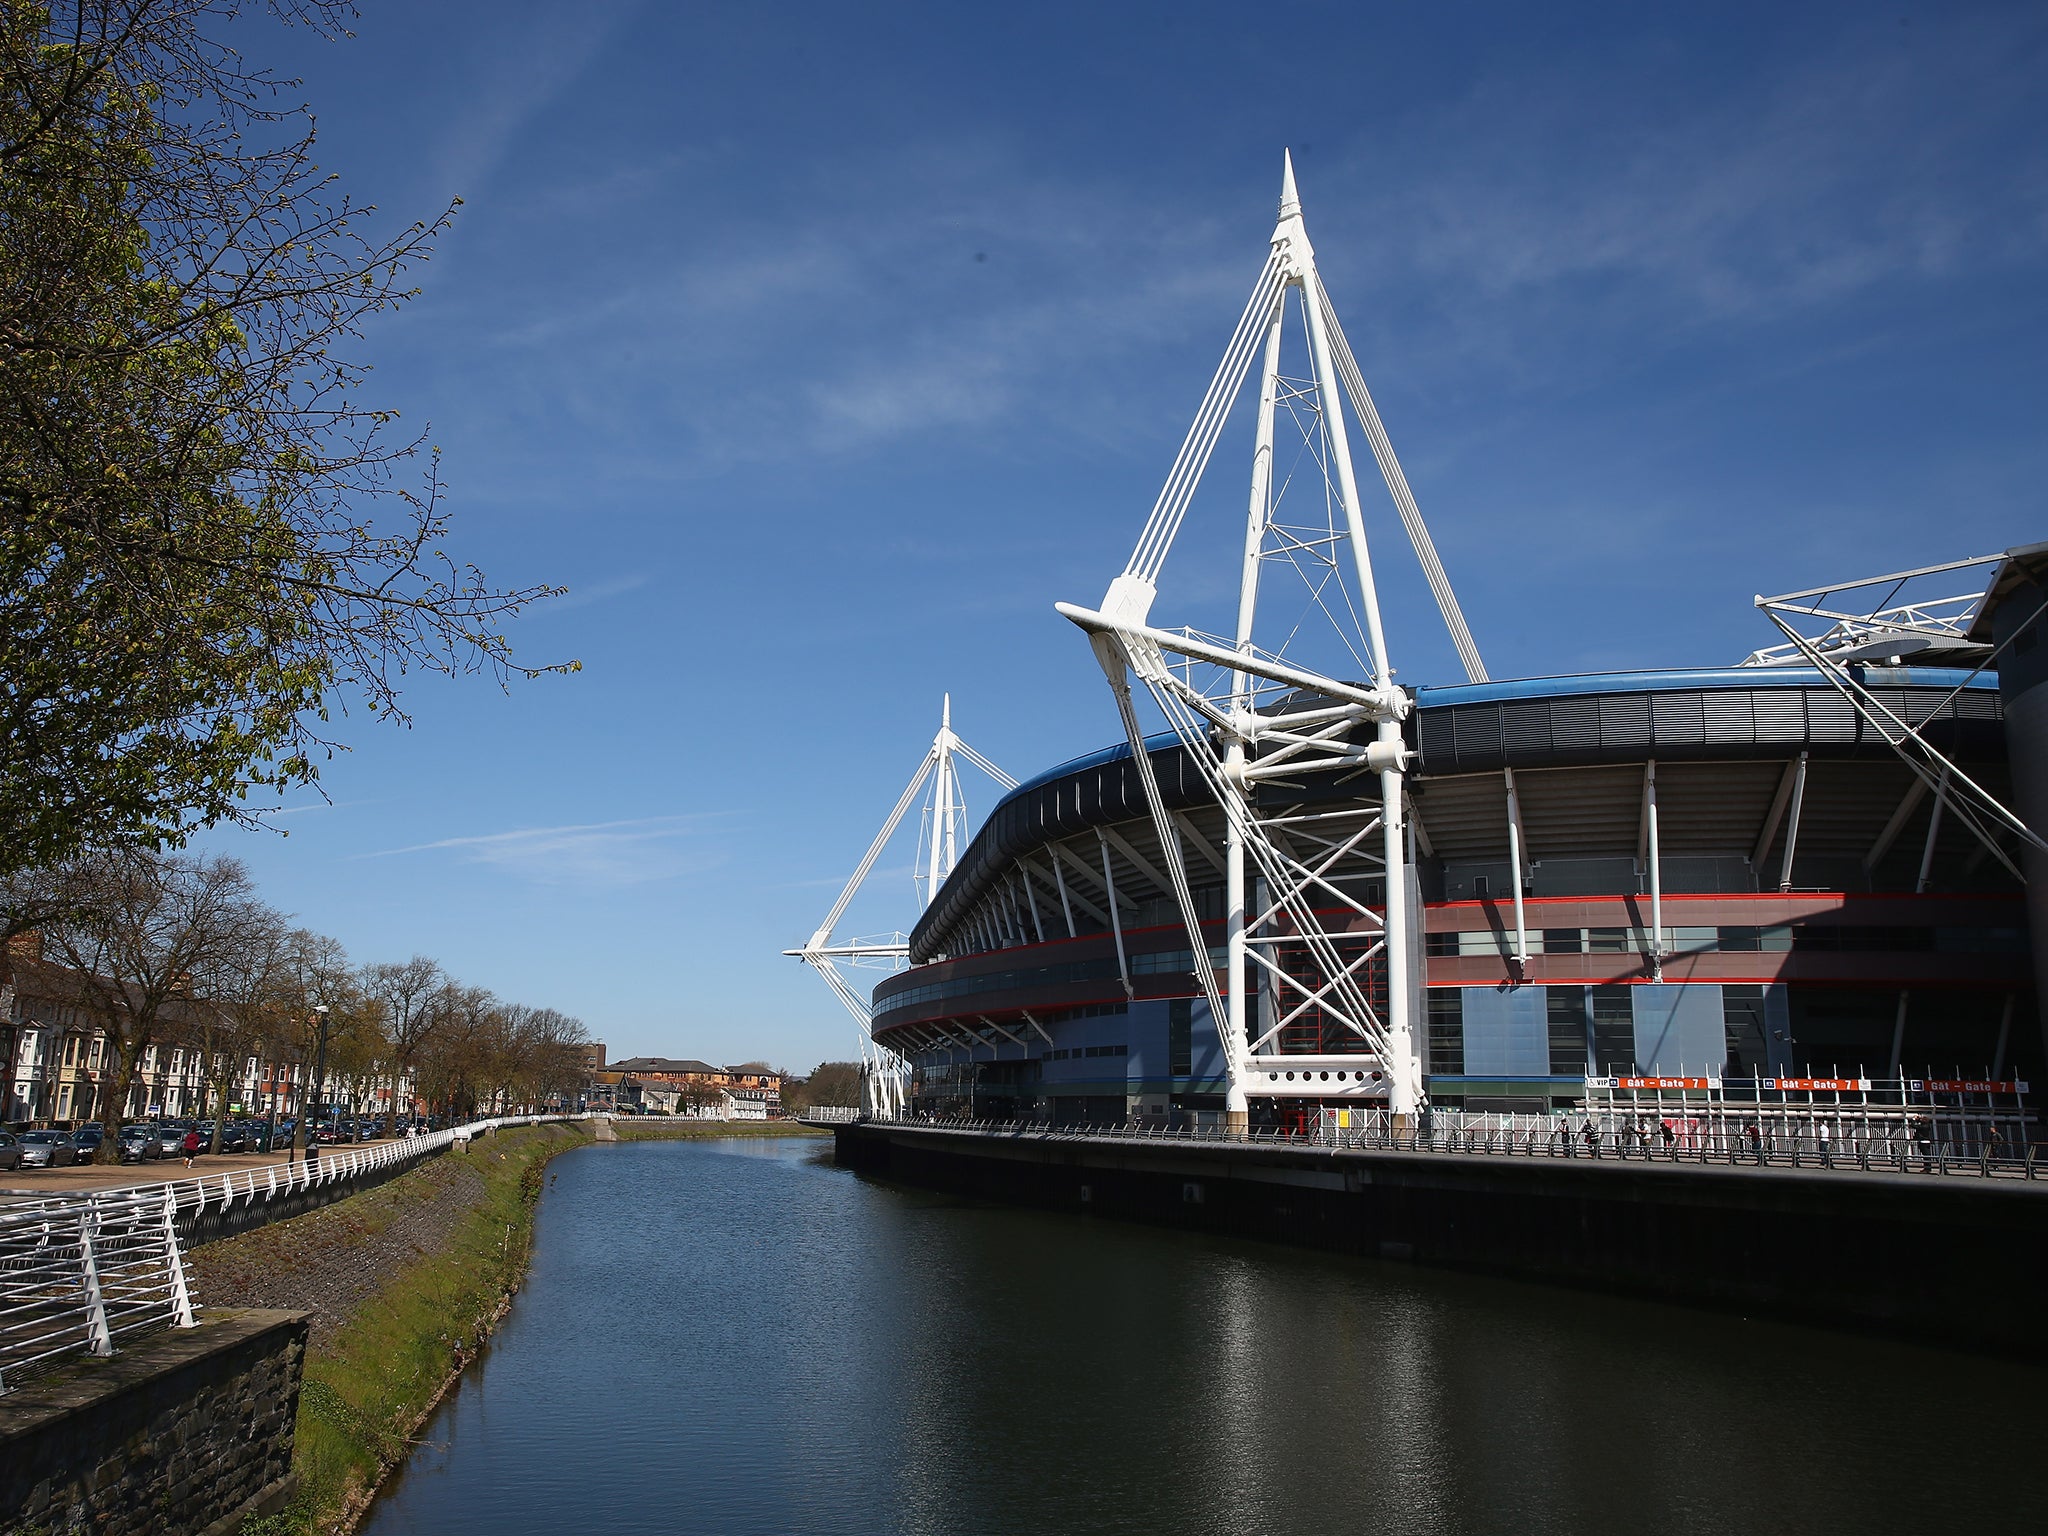 John Laing has worked on projects including the Millennium Stadium in Cardiff (Getty)